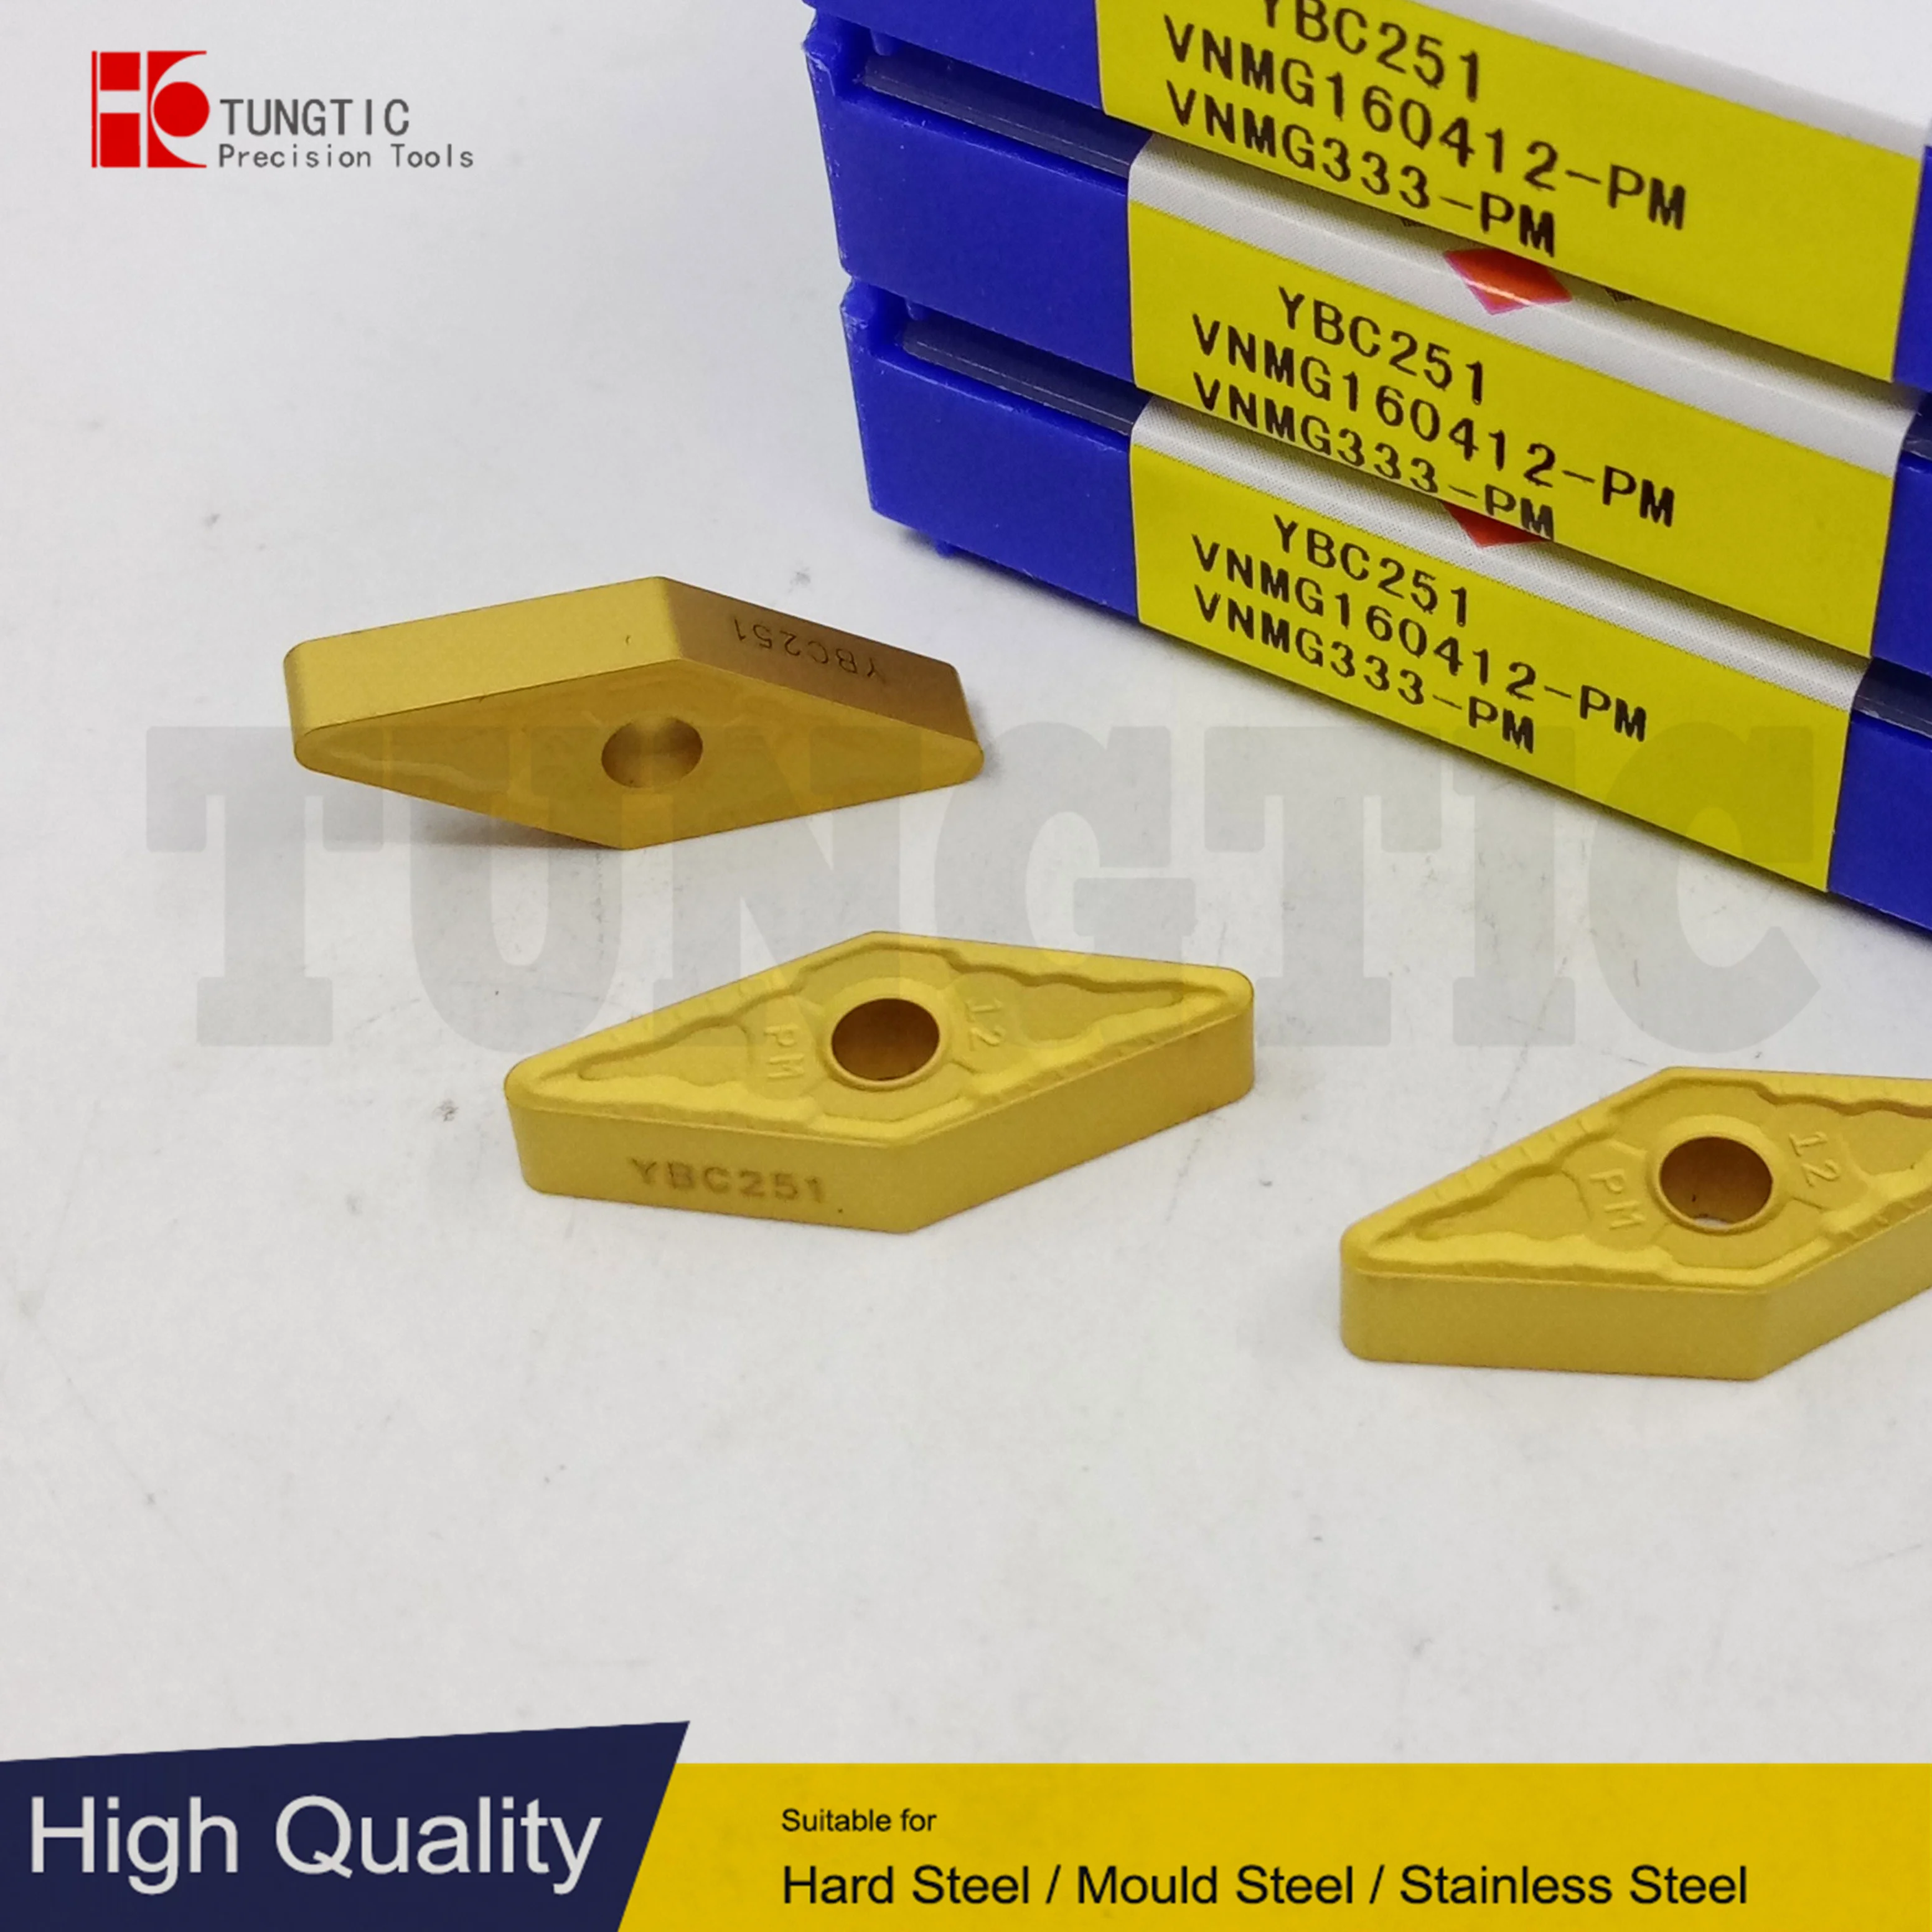 

TUNGTIC VNMG160412-PM VNMG 160412-PM Turning Inserts Carbide Cutter For Cast Iron